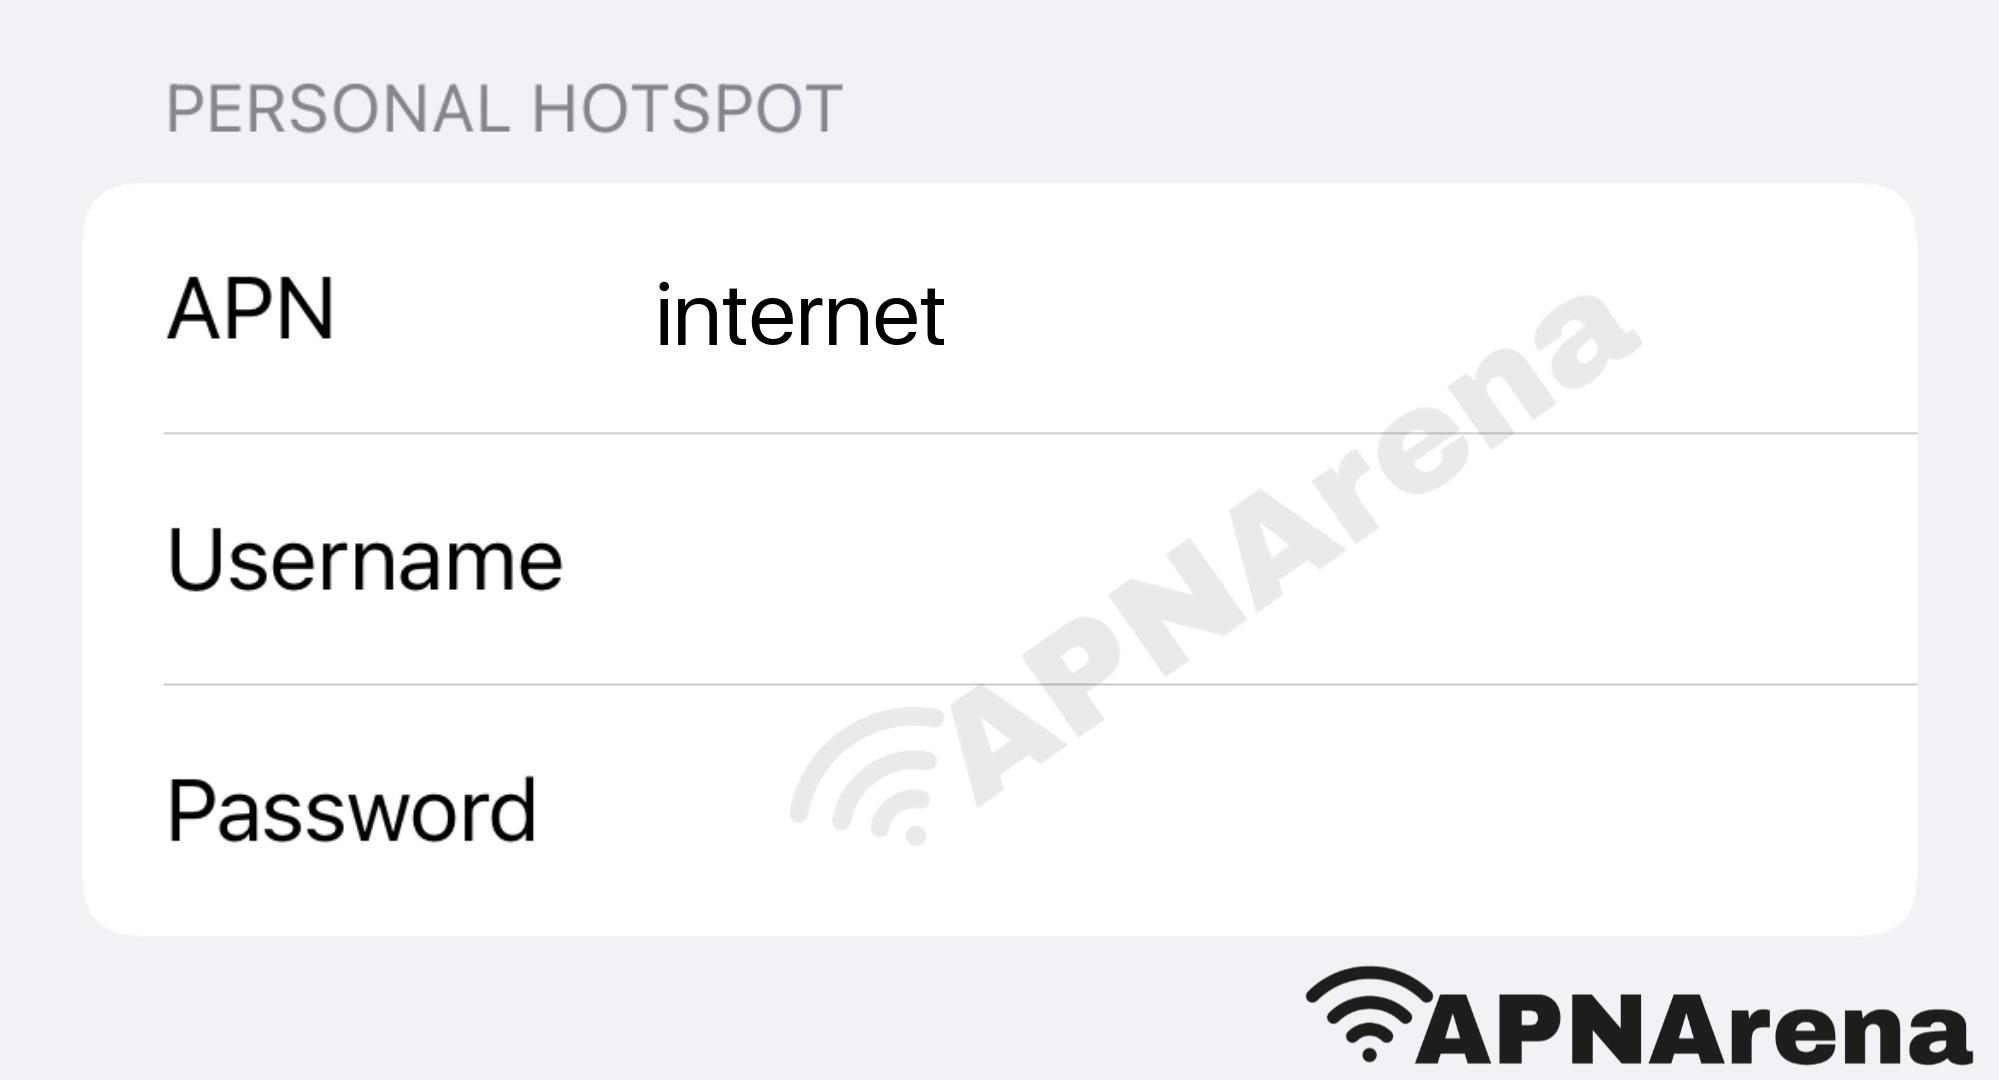 PhoneBox Personal Hotspot Settings for iPhone